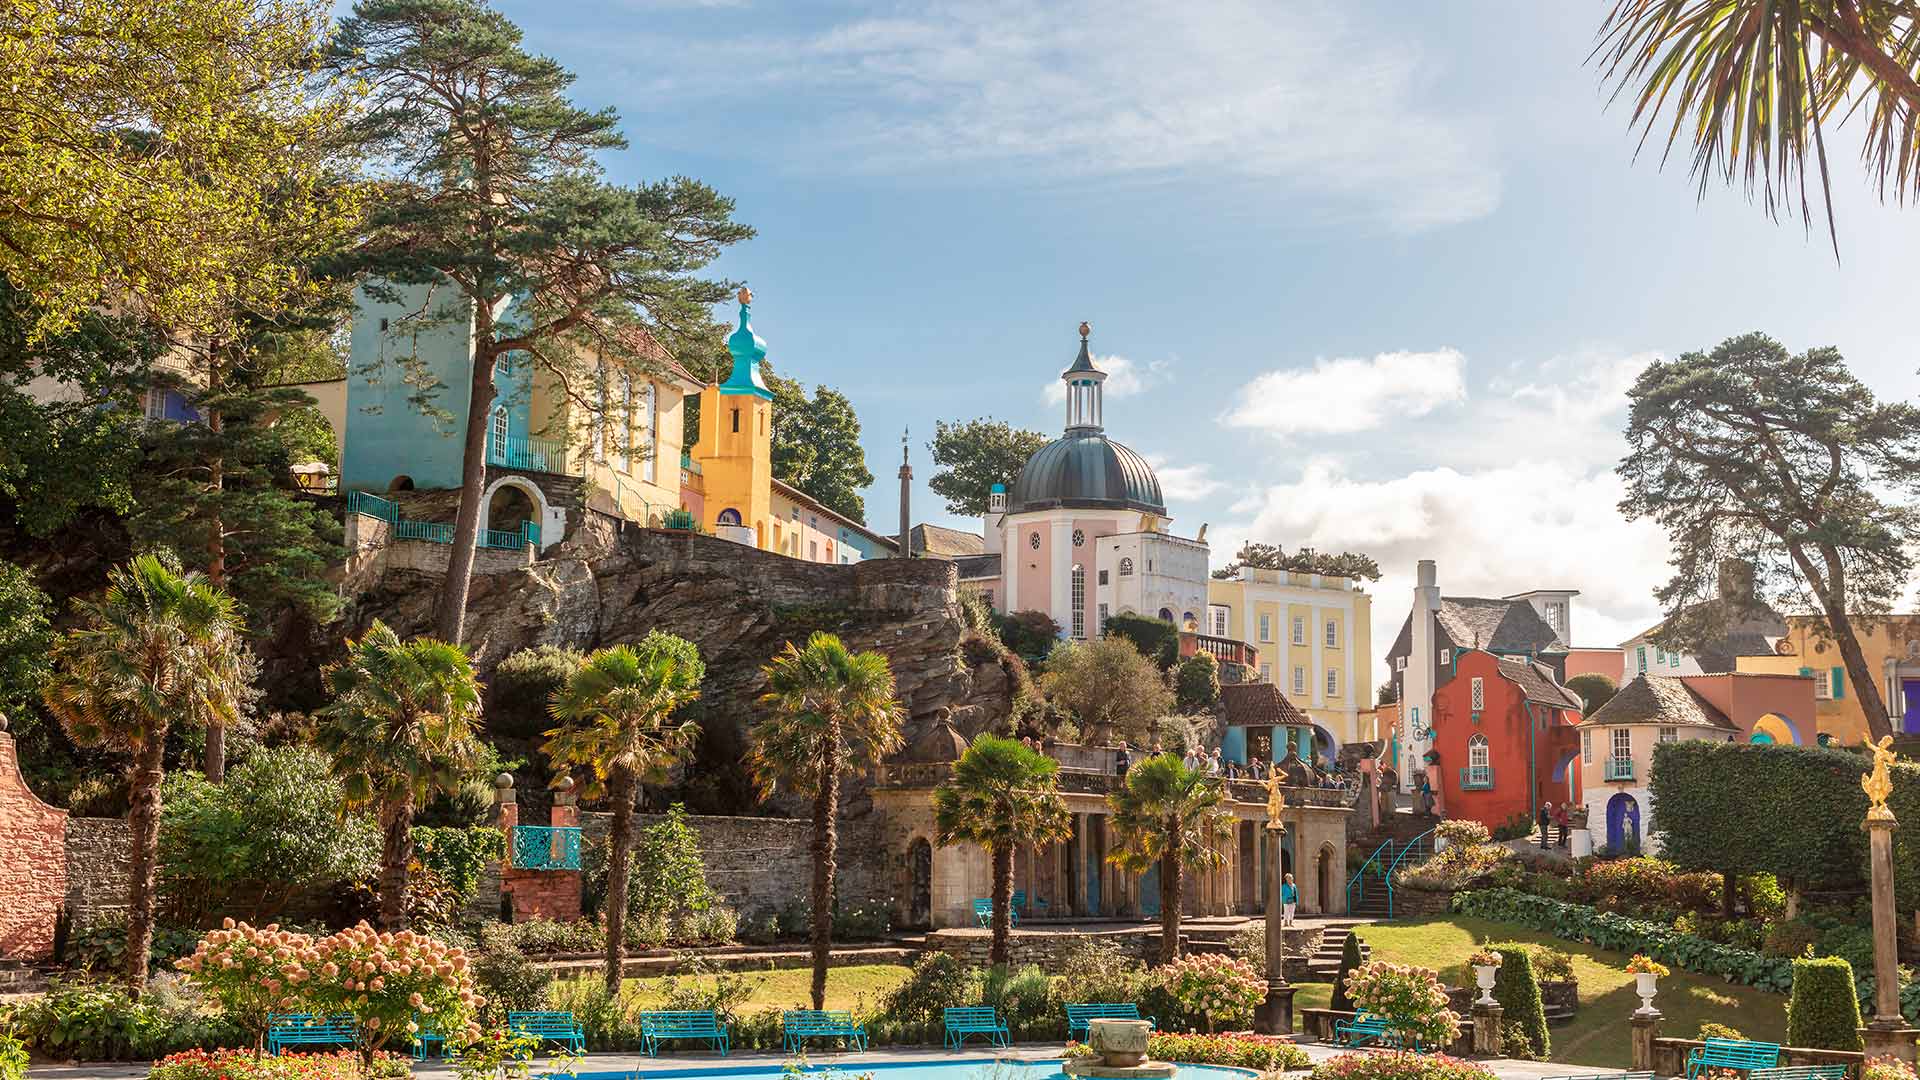 The colourful Italian inspired model village of Portmeirion in Wales